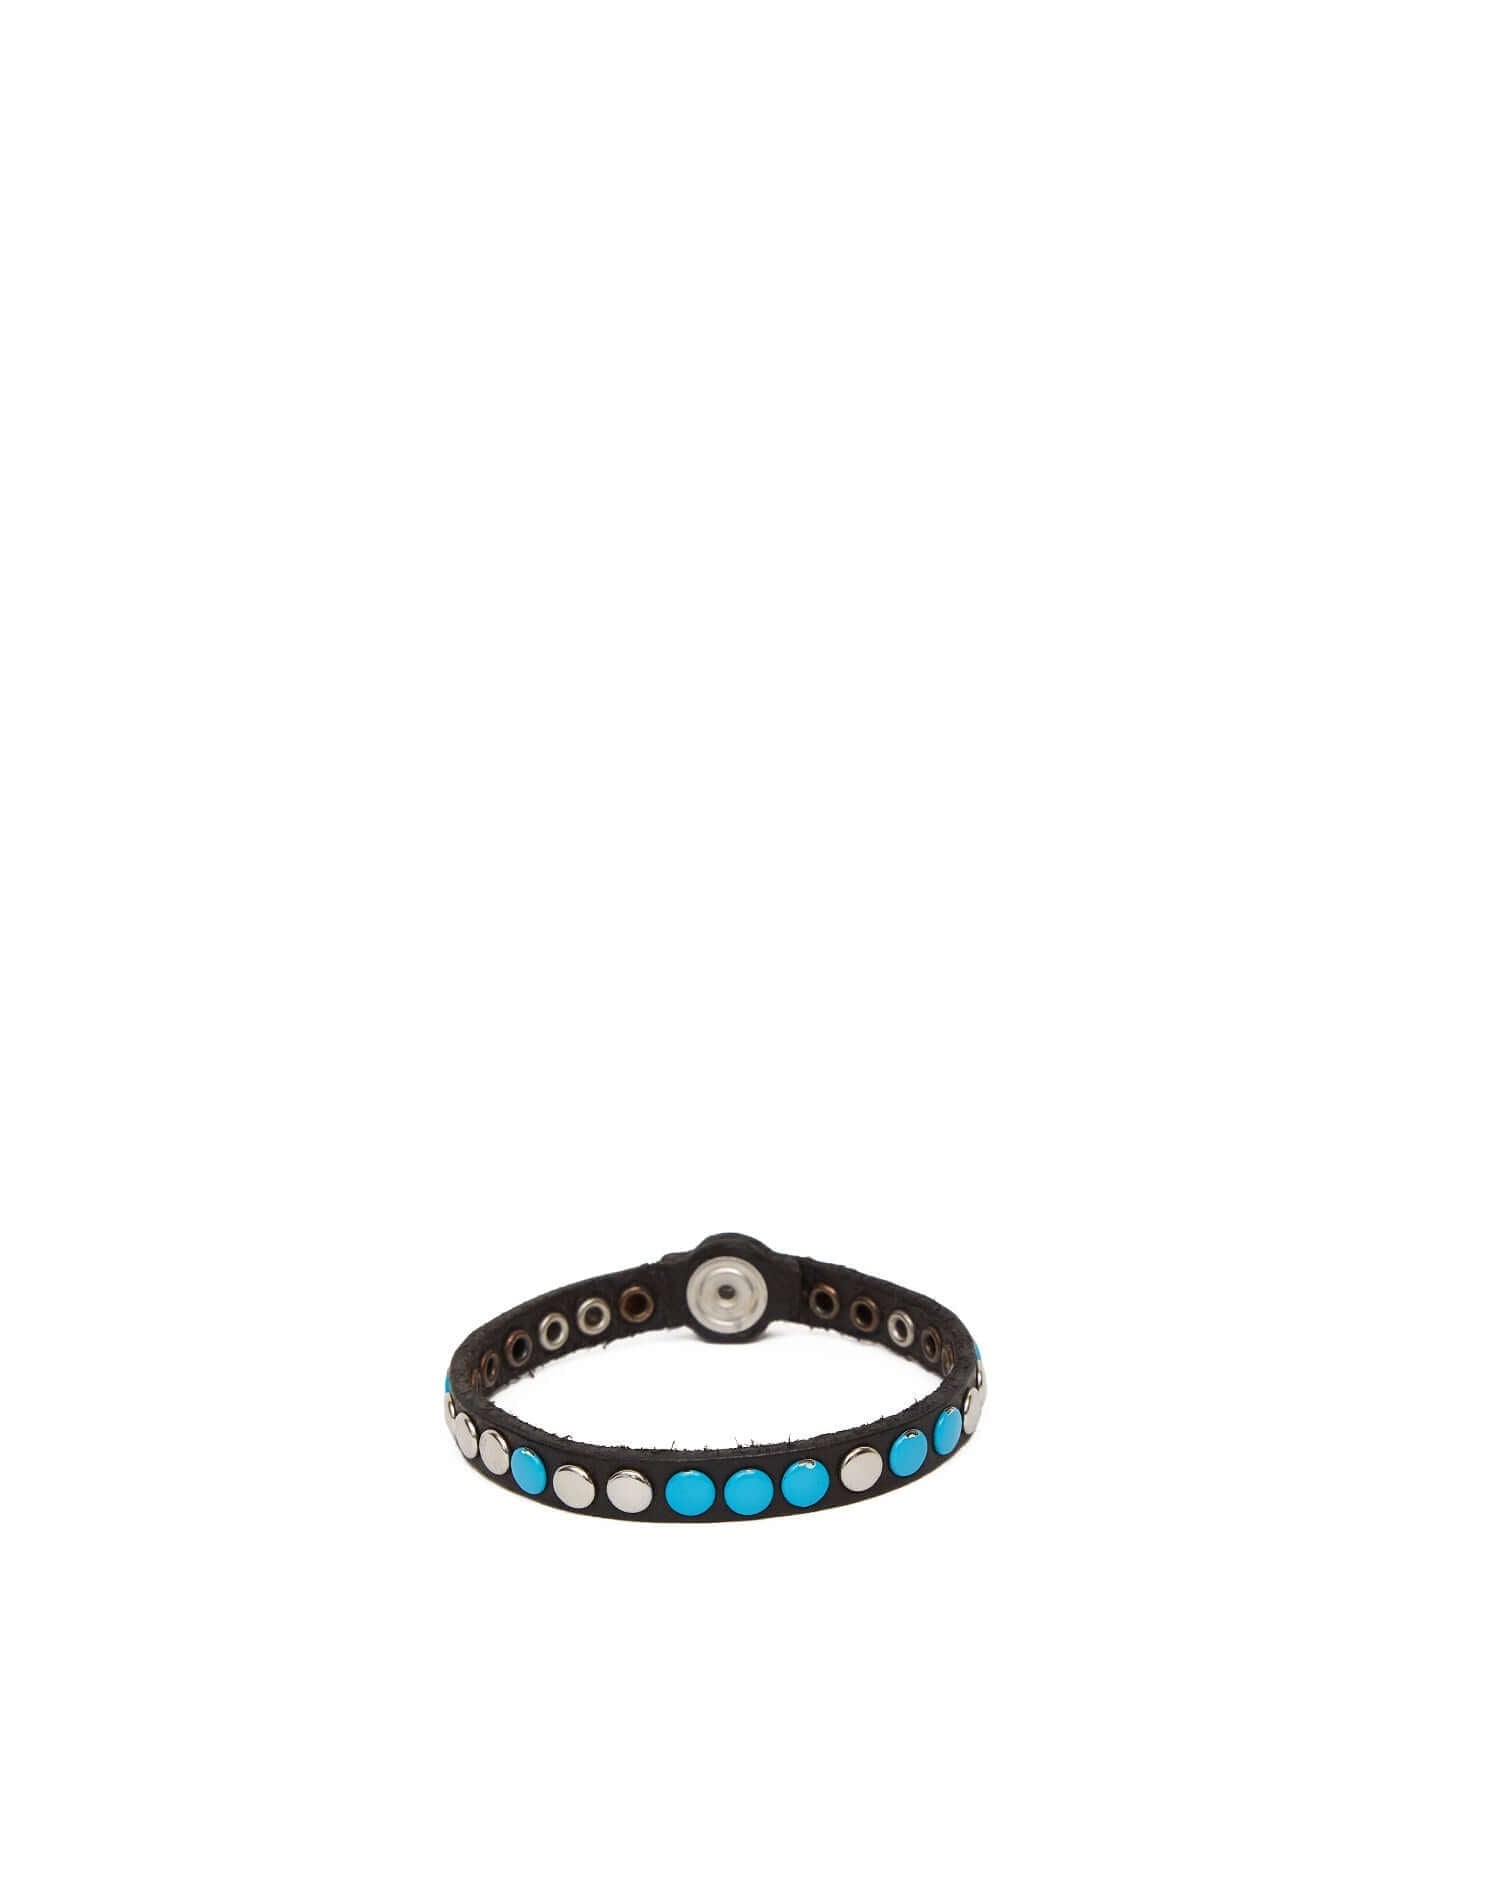 10.000 ONE LINE VARNISH BR Fluo light blue leather bracelet with studs, zamac button closure with carved HTC Los Angeles logo. Size M lenght: 20cm; Size S lenght: 19cm. 100% Made in Italy. HTC LOS ANGELES